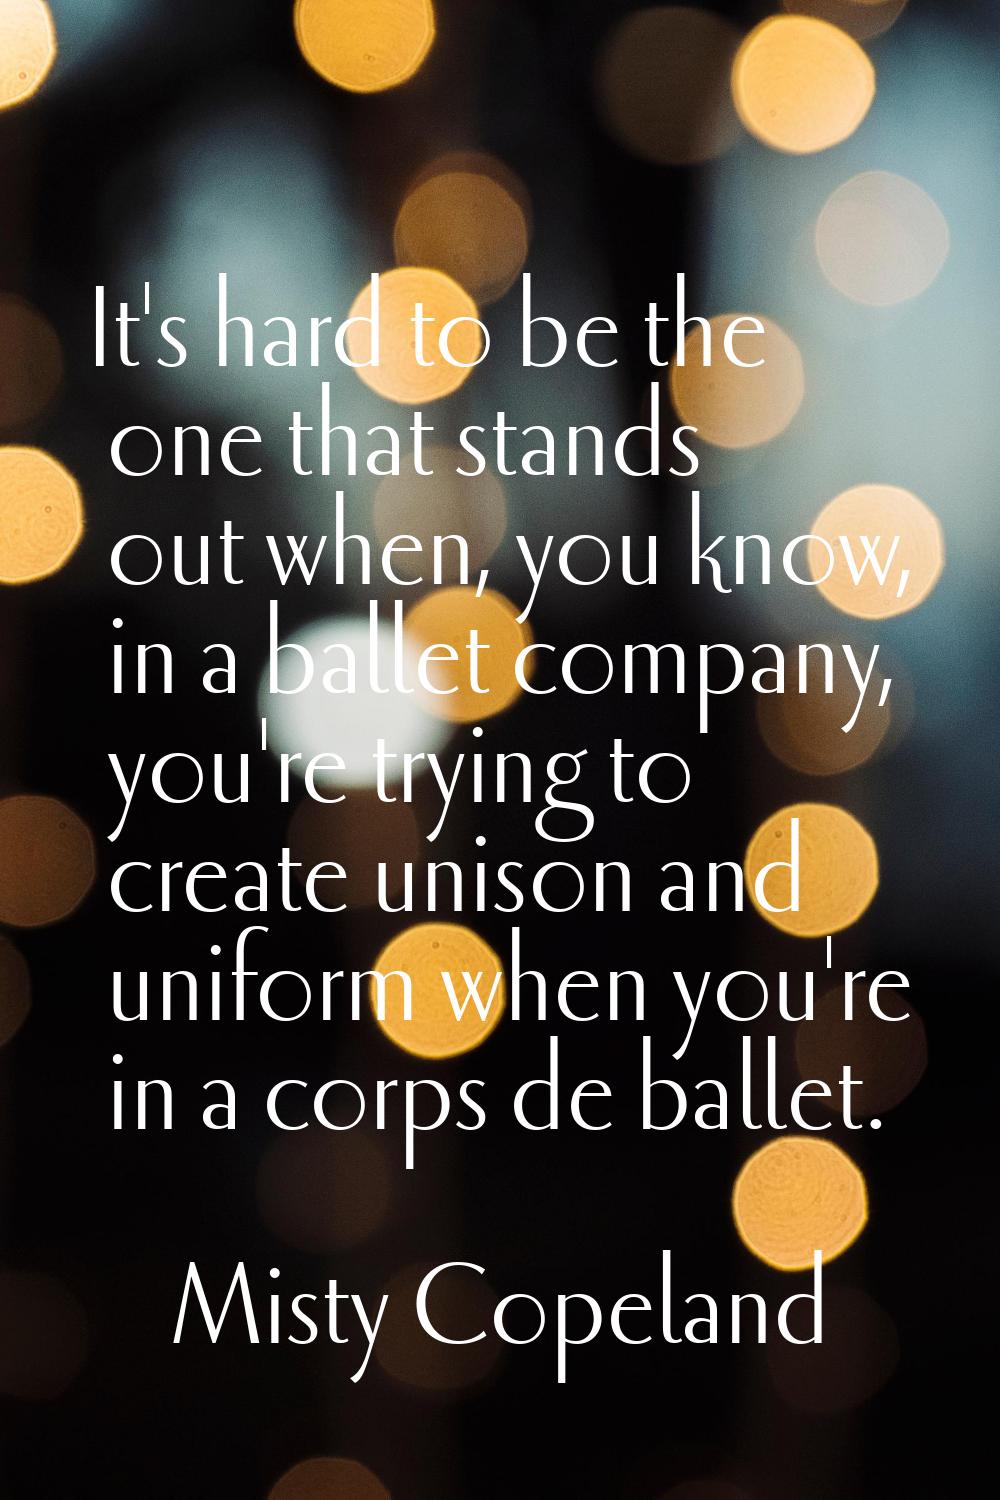 It's hard to be the one that stands out when, you know, in a ballet company, you're trying to creat